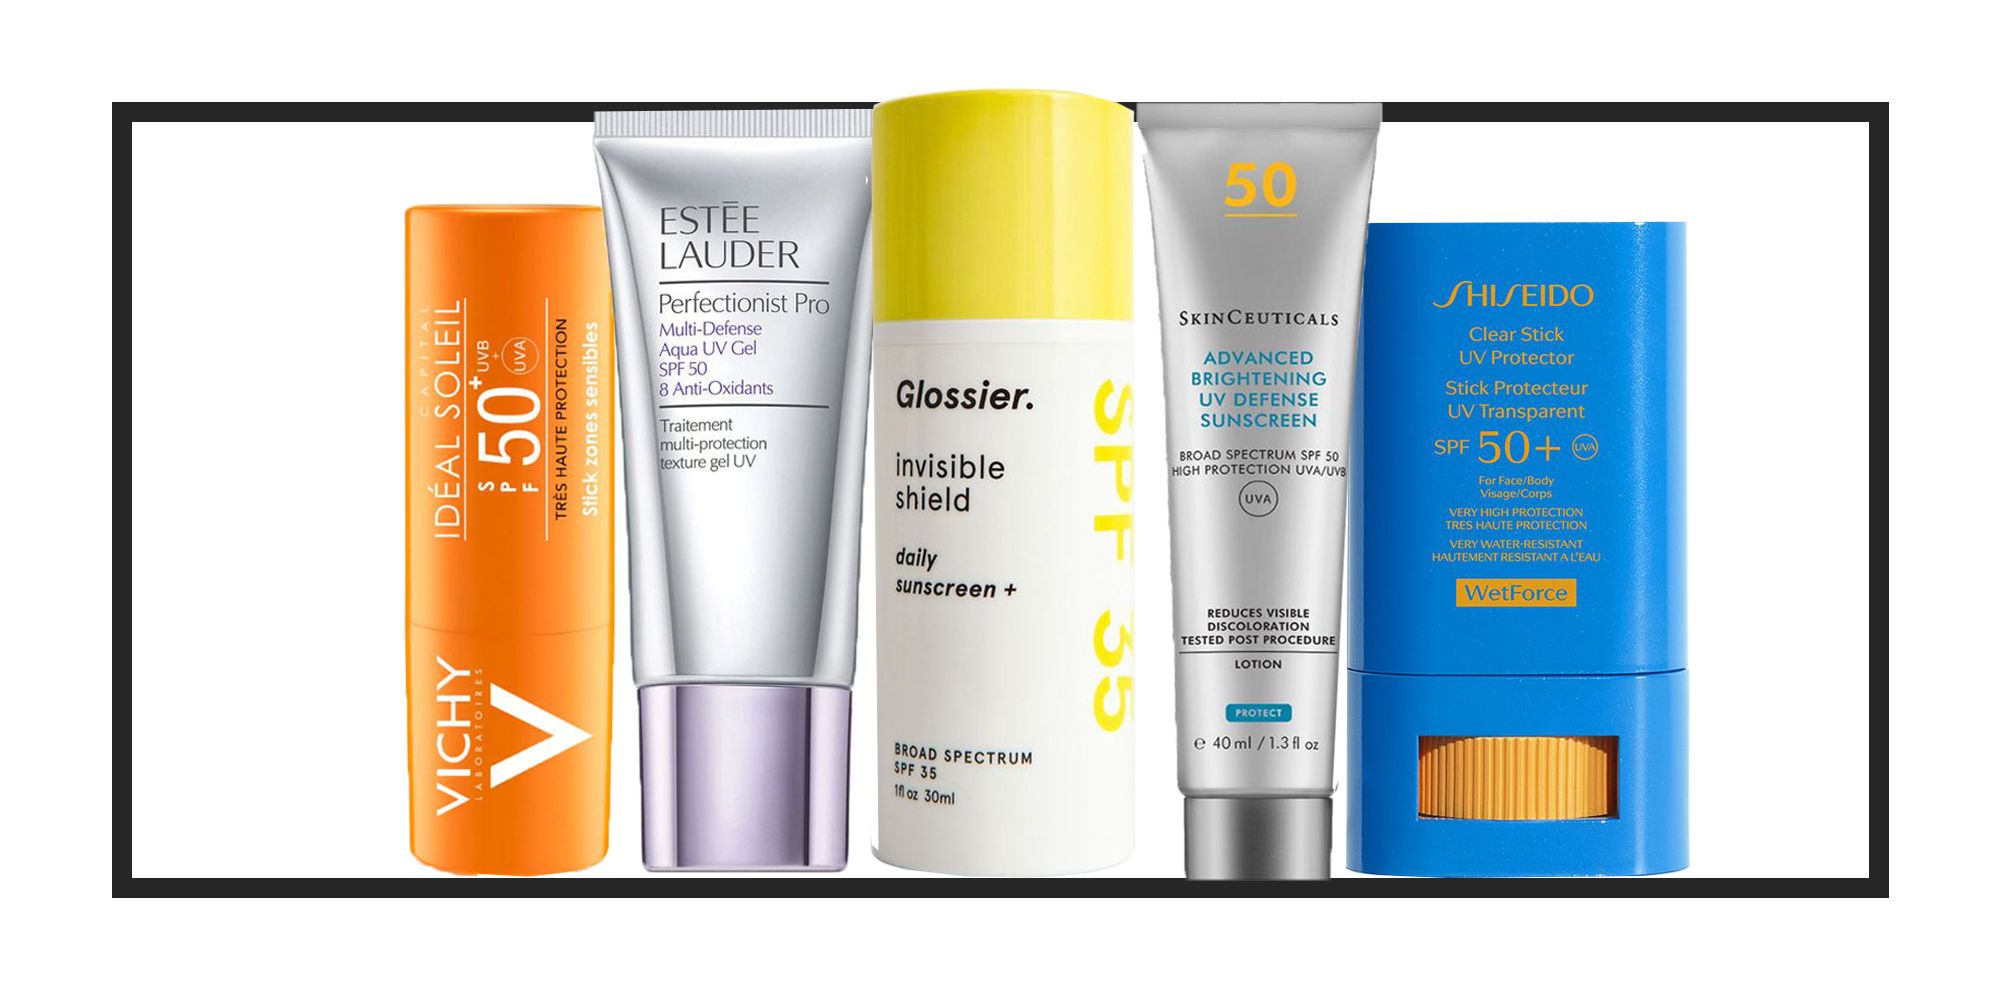 Best facial sunscreens 10 Top clear suncreams for